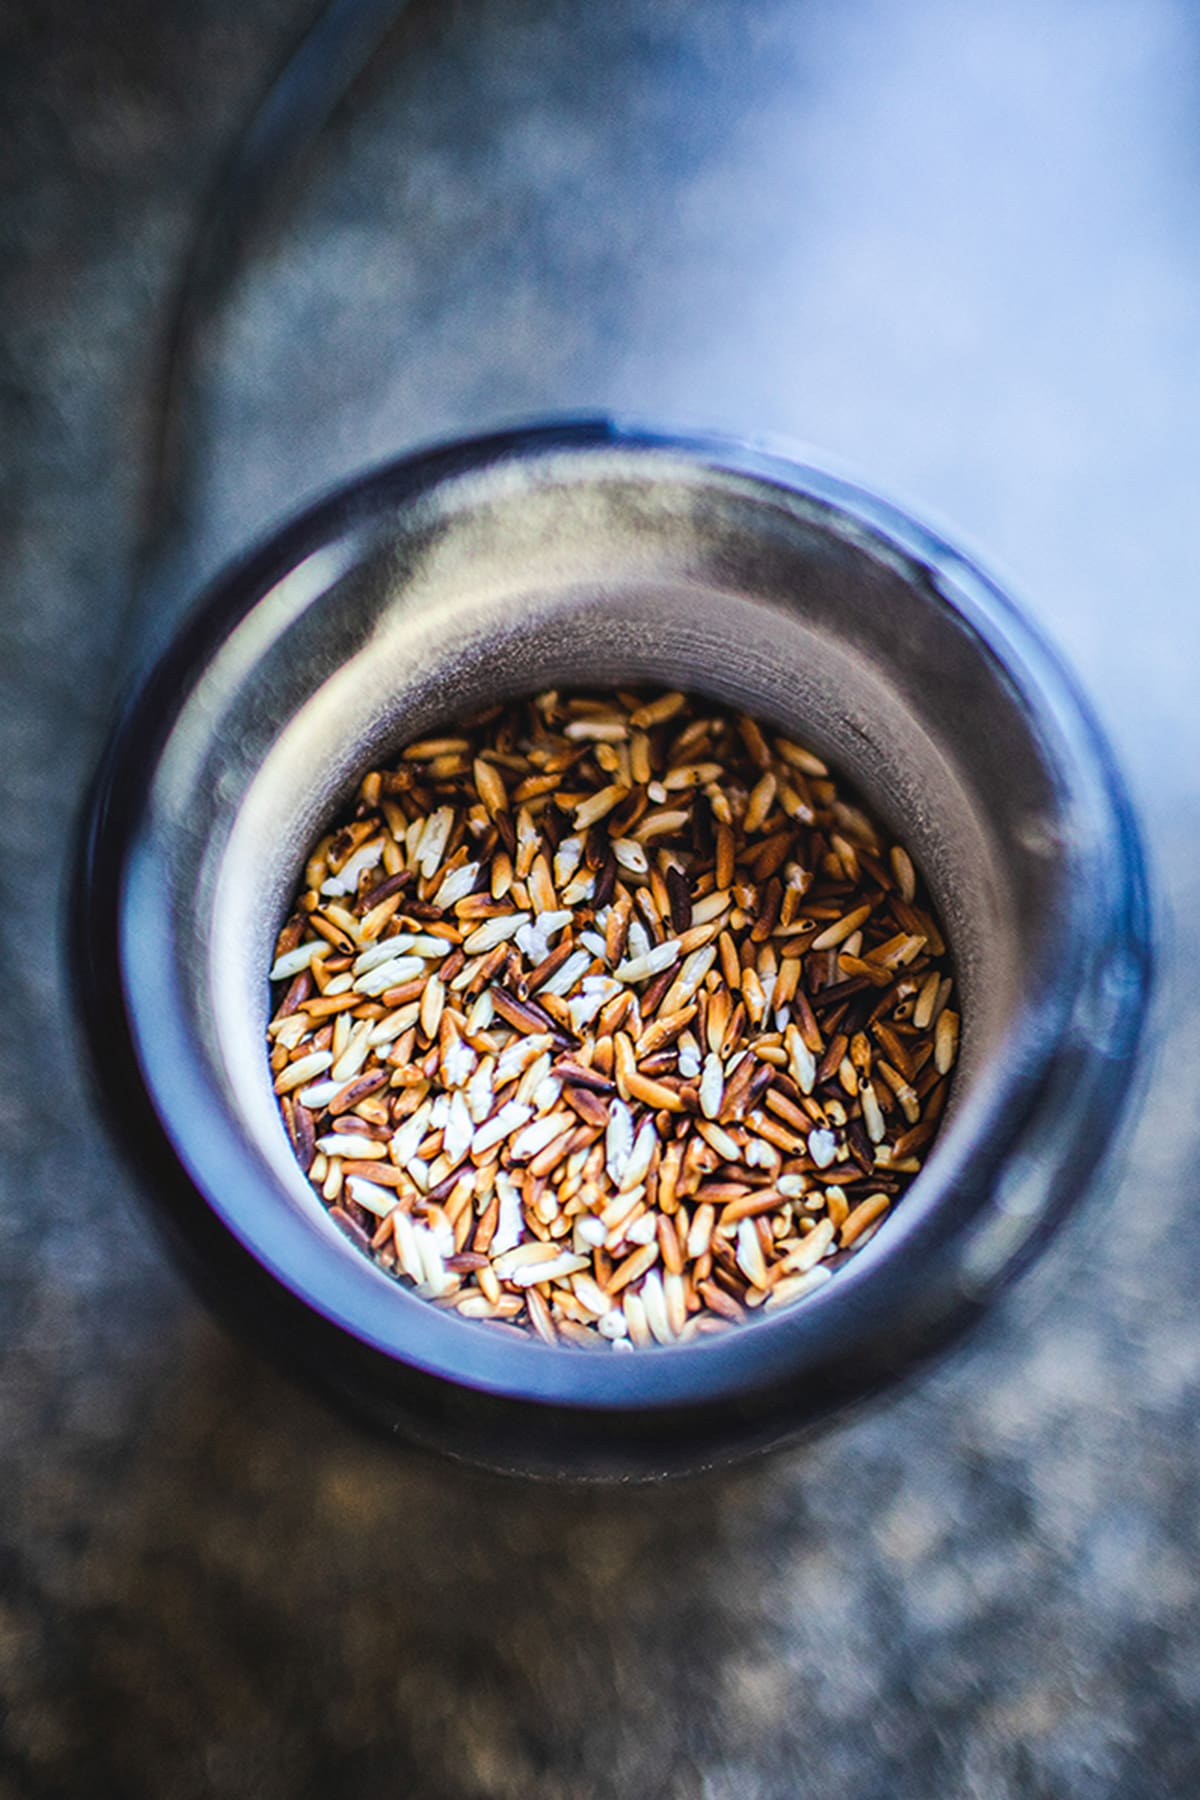 Toasted rice powder in a spice grinder